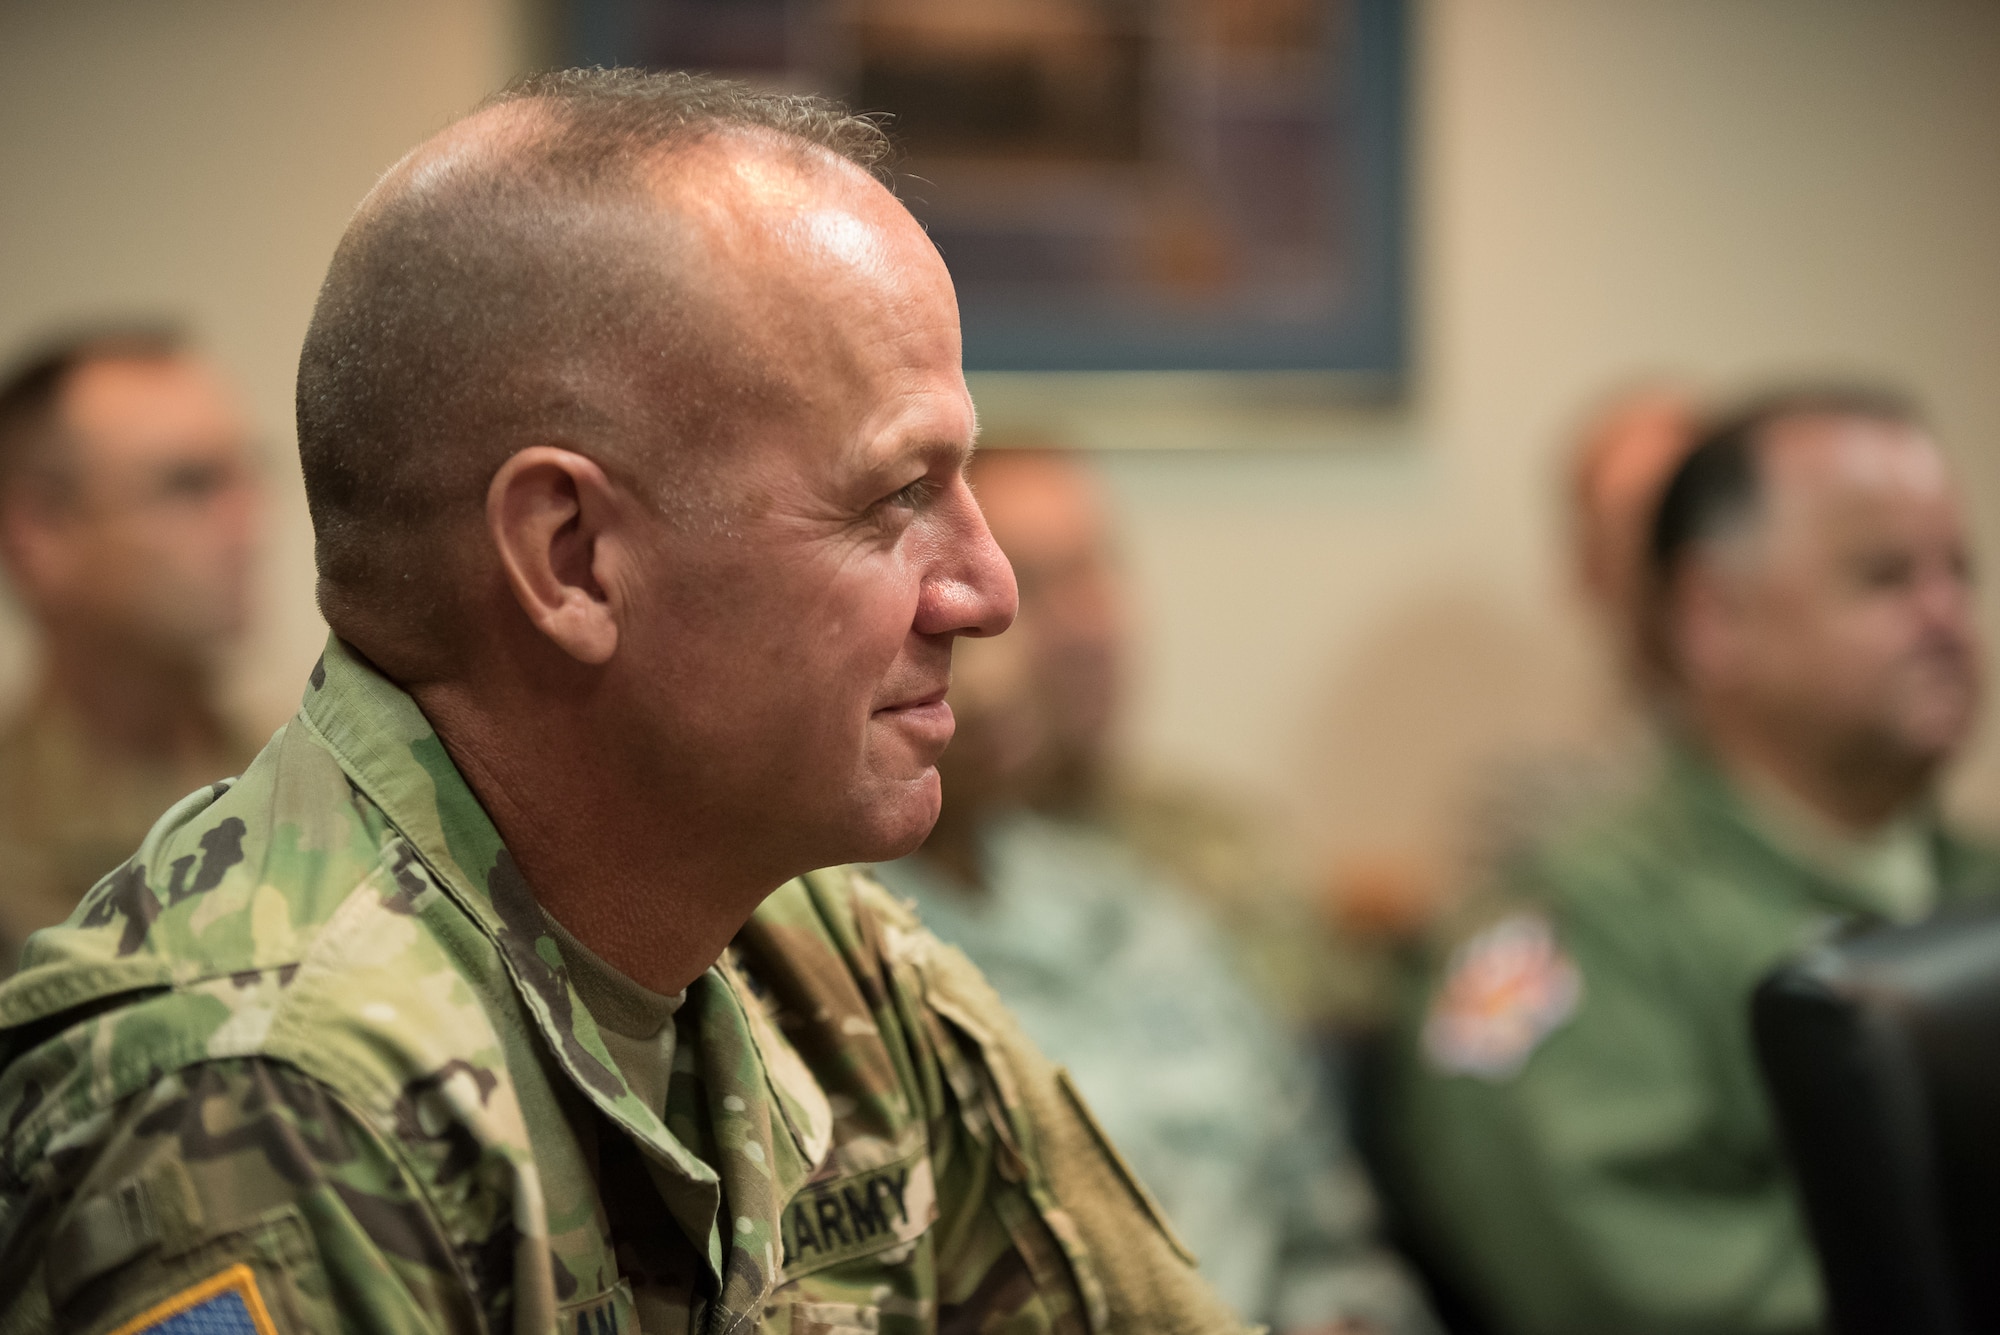 Kentucky’s adjutant general, U.S. Army Maj. Gen. Stephen R. Hogan, attends a ceremony at the Kentucky Air National Guard base in Louisville, Ky., Aug. 10, 2019, during which Brig. Gen. Warren Hurst, Kentucky’s assistant adjutant general for Air, was awarded the Distinguished Service Medal. The honor recognizes exceptionally meritorious service in duties of great responsibility. (U.S. Air National Guard photo by Dale Greer)